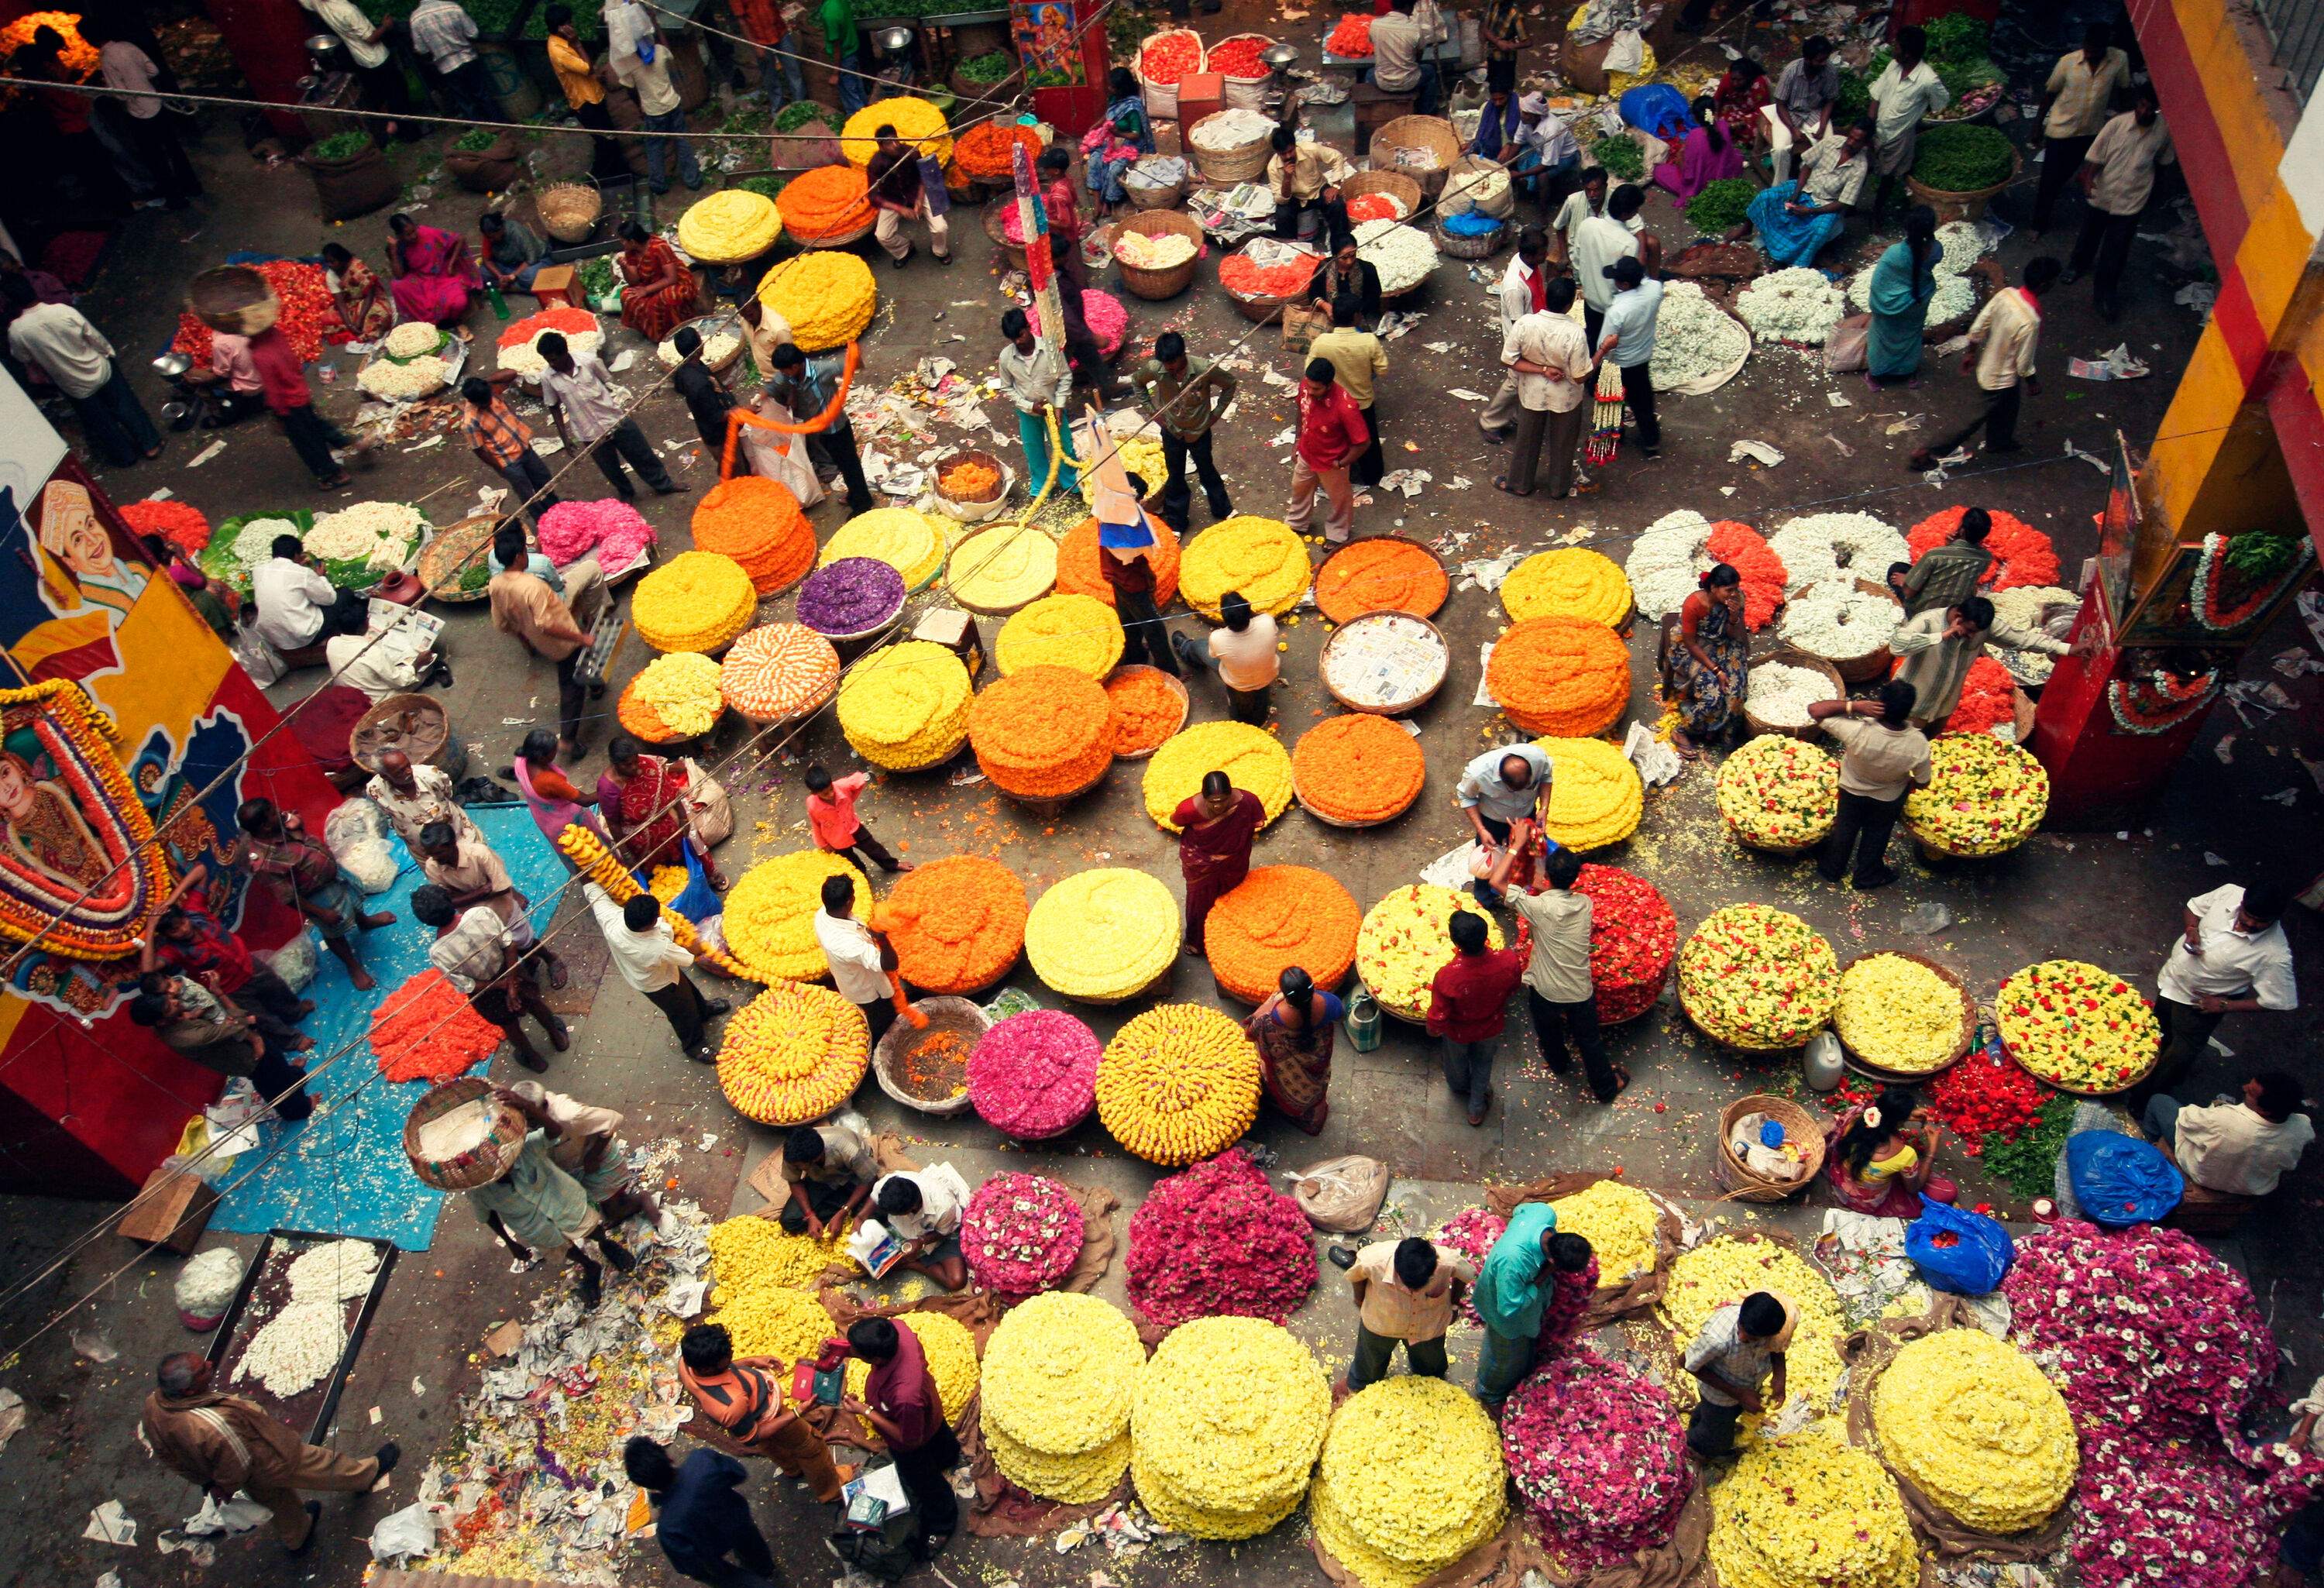 A crowded market with vendors selling vibrant red and orange flower garlands in huge baskets.